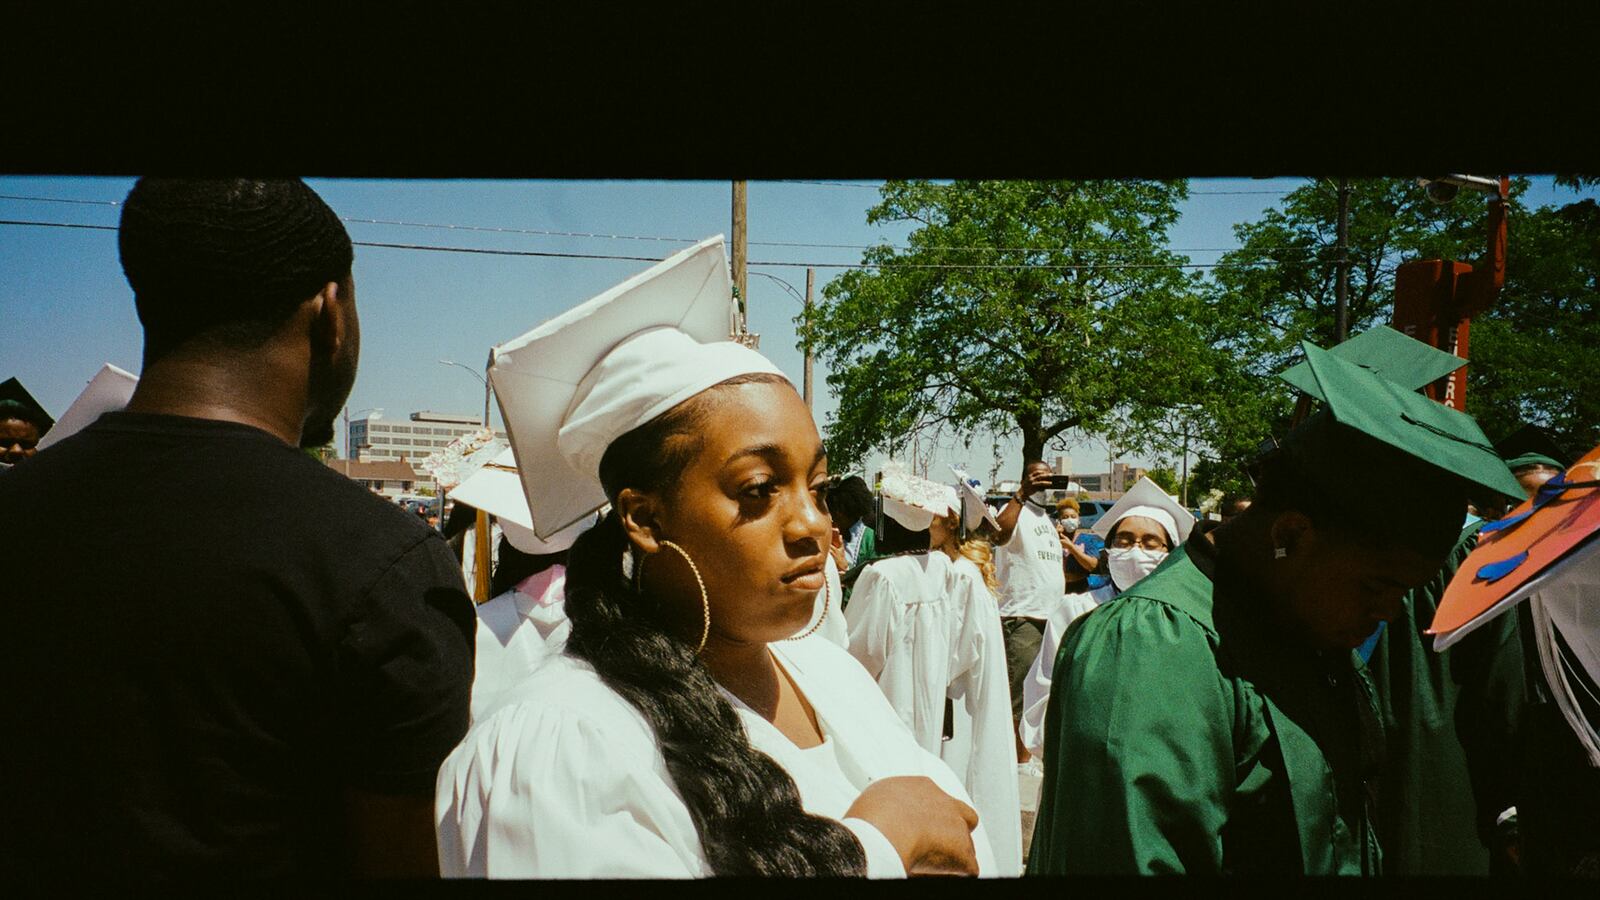 A young woman wearing a white graduation gown and cap looks contemplative as she’s surrounded by other teenagers.